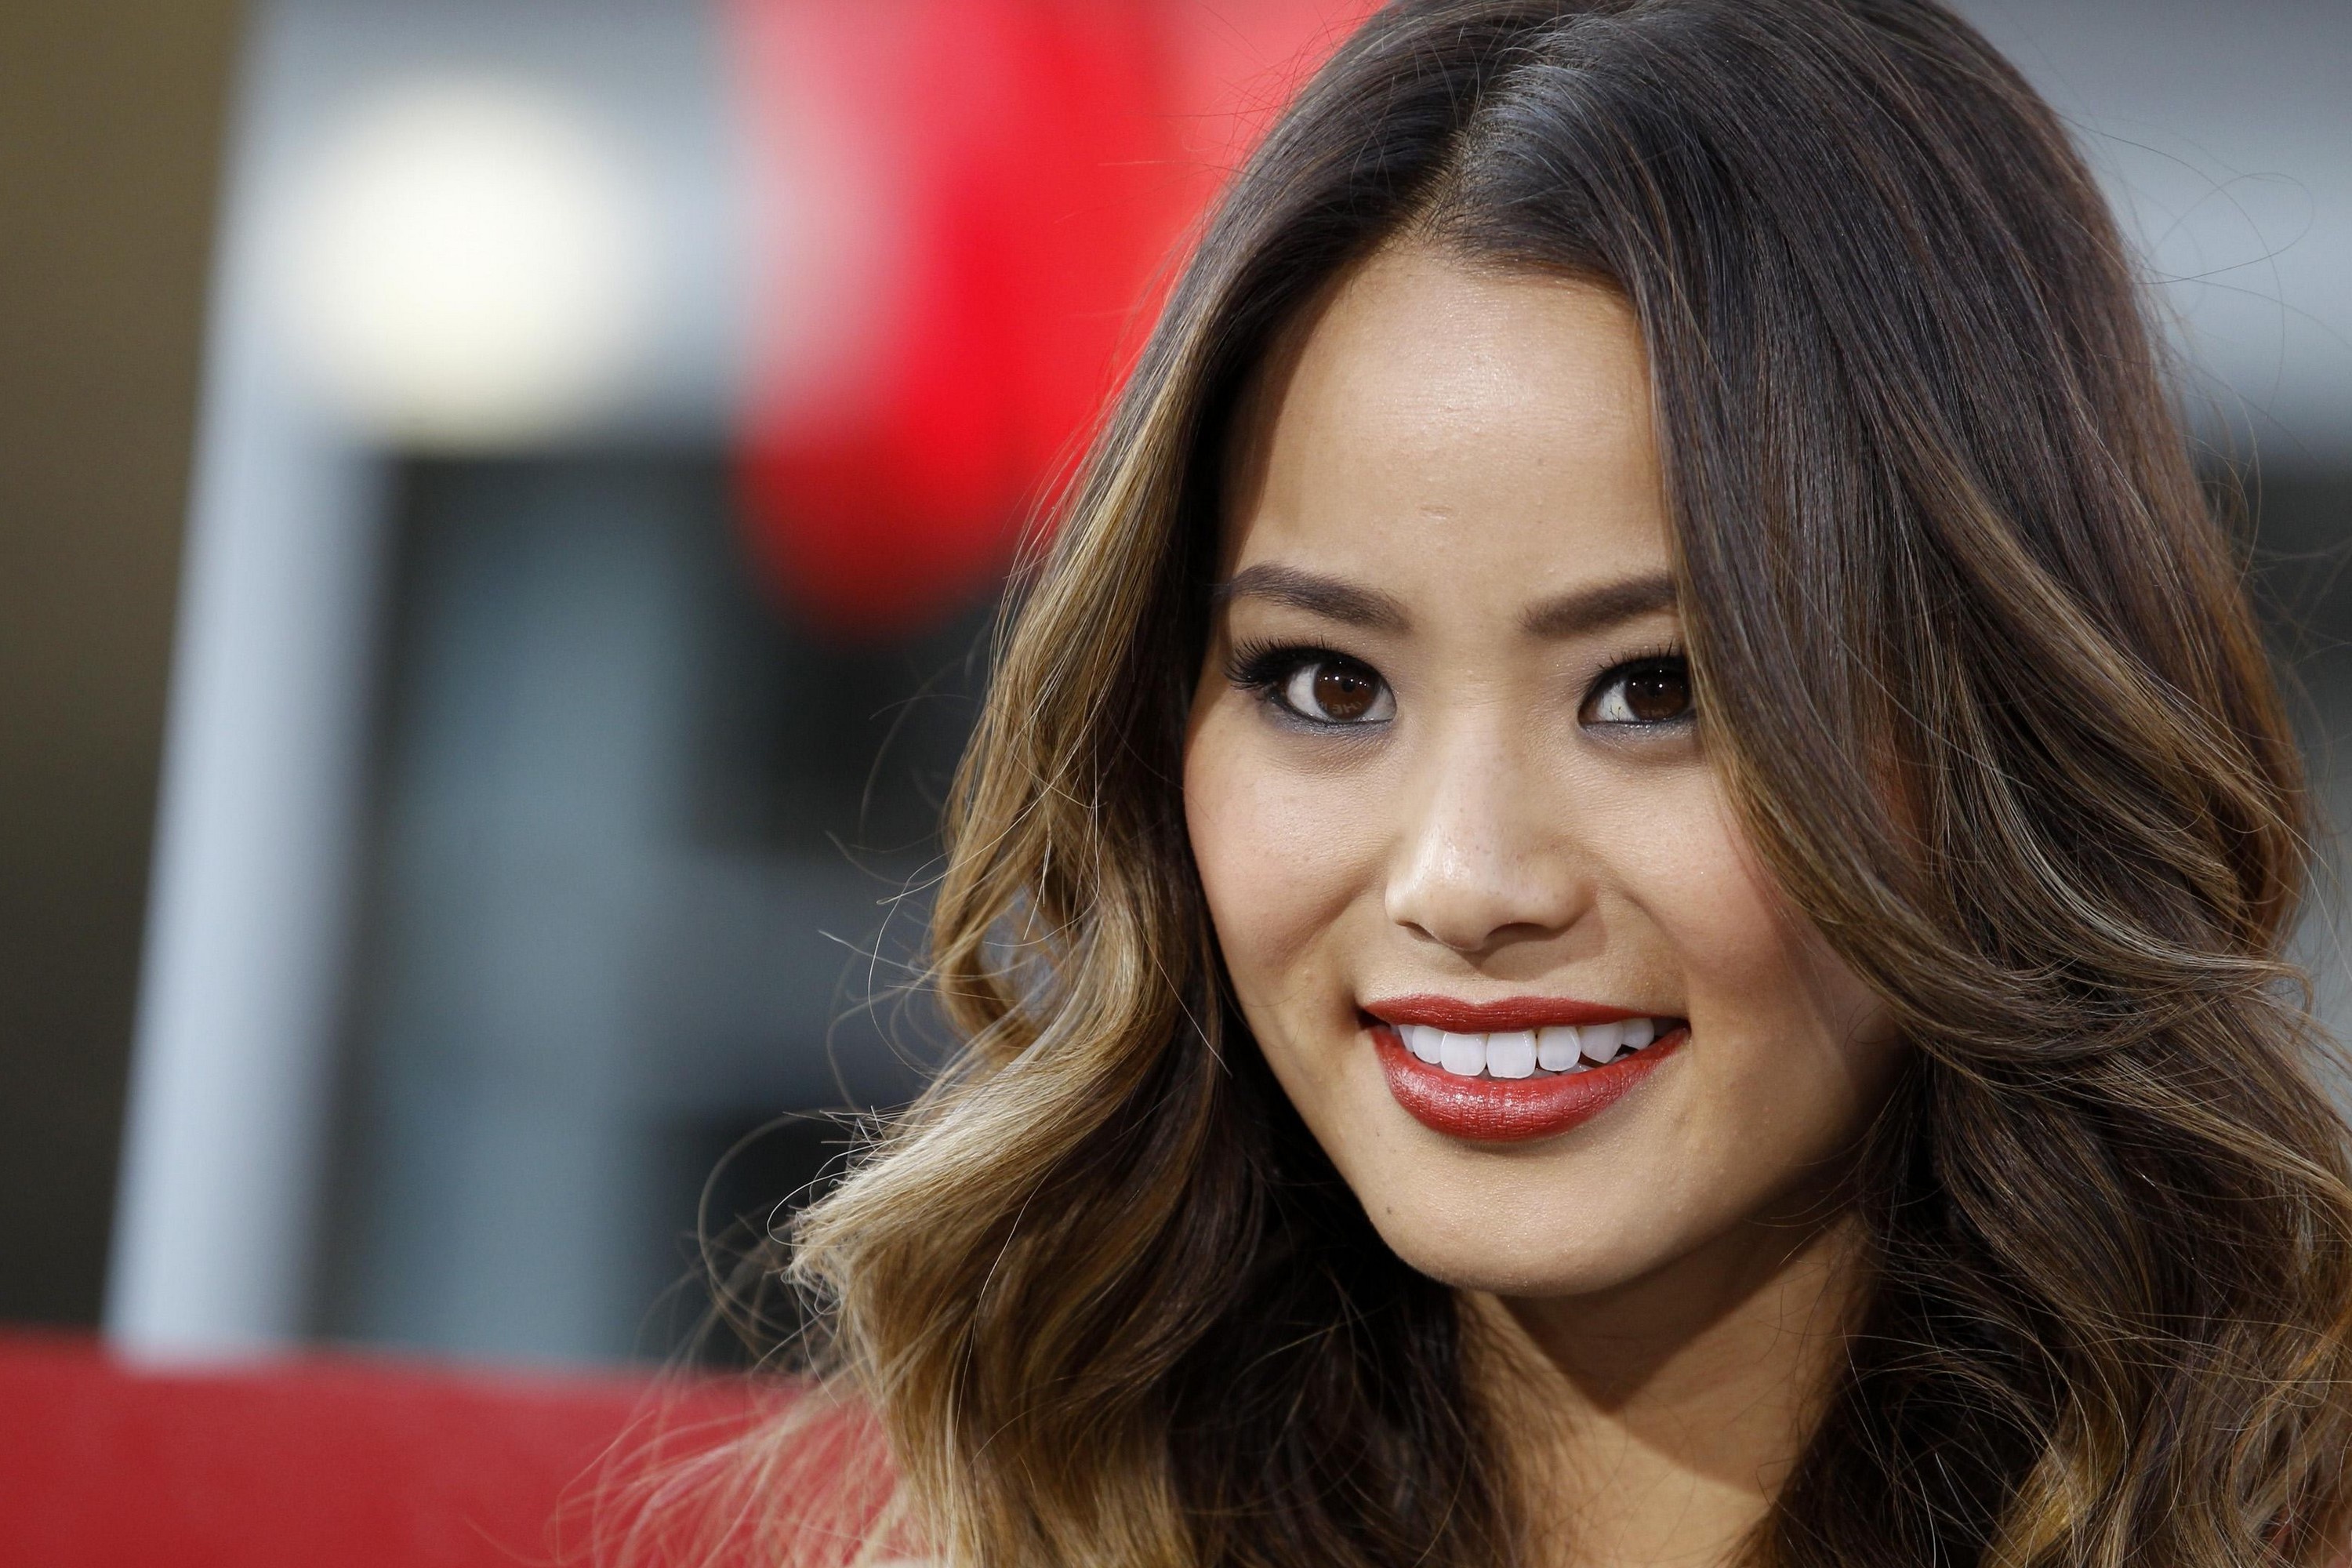 women, jamie chung, actress, brown eyes, brunette, close up, face, lipstick, smile